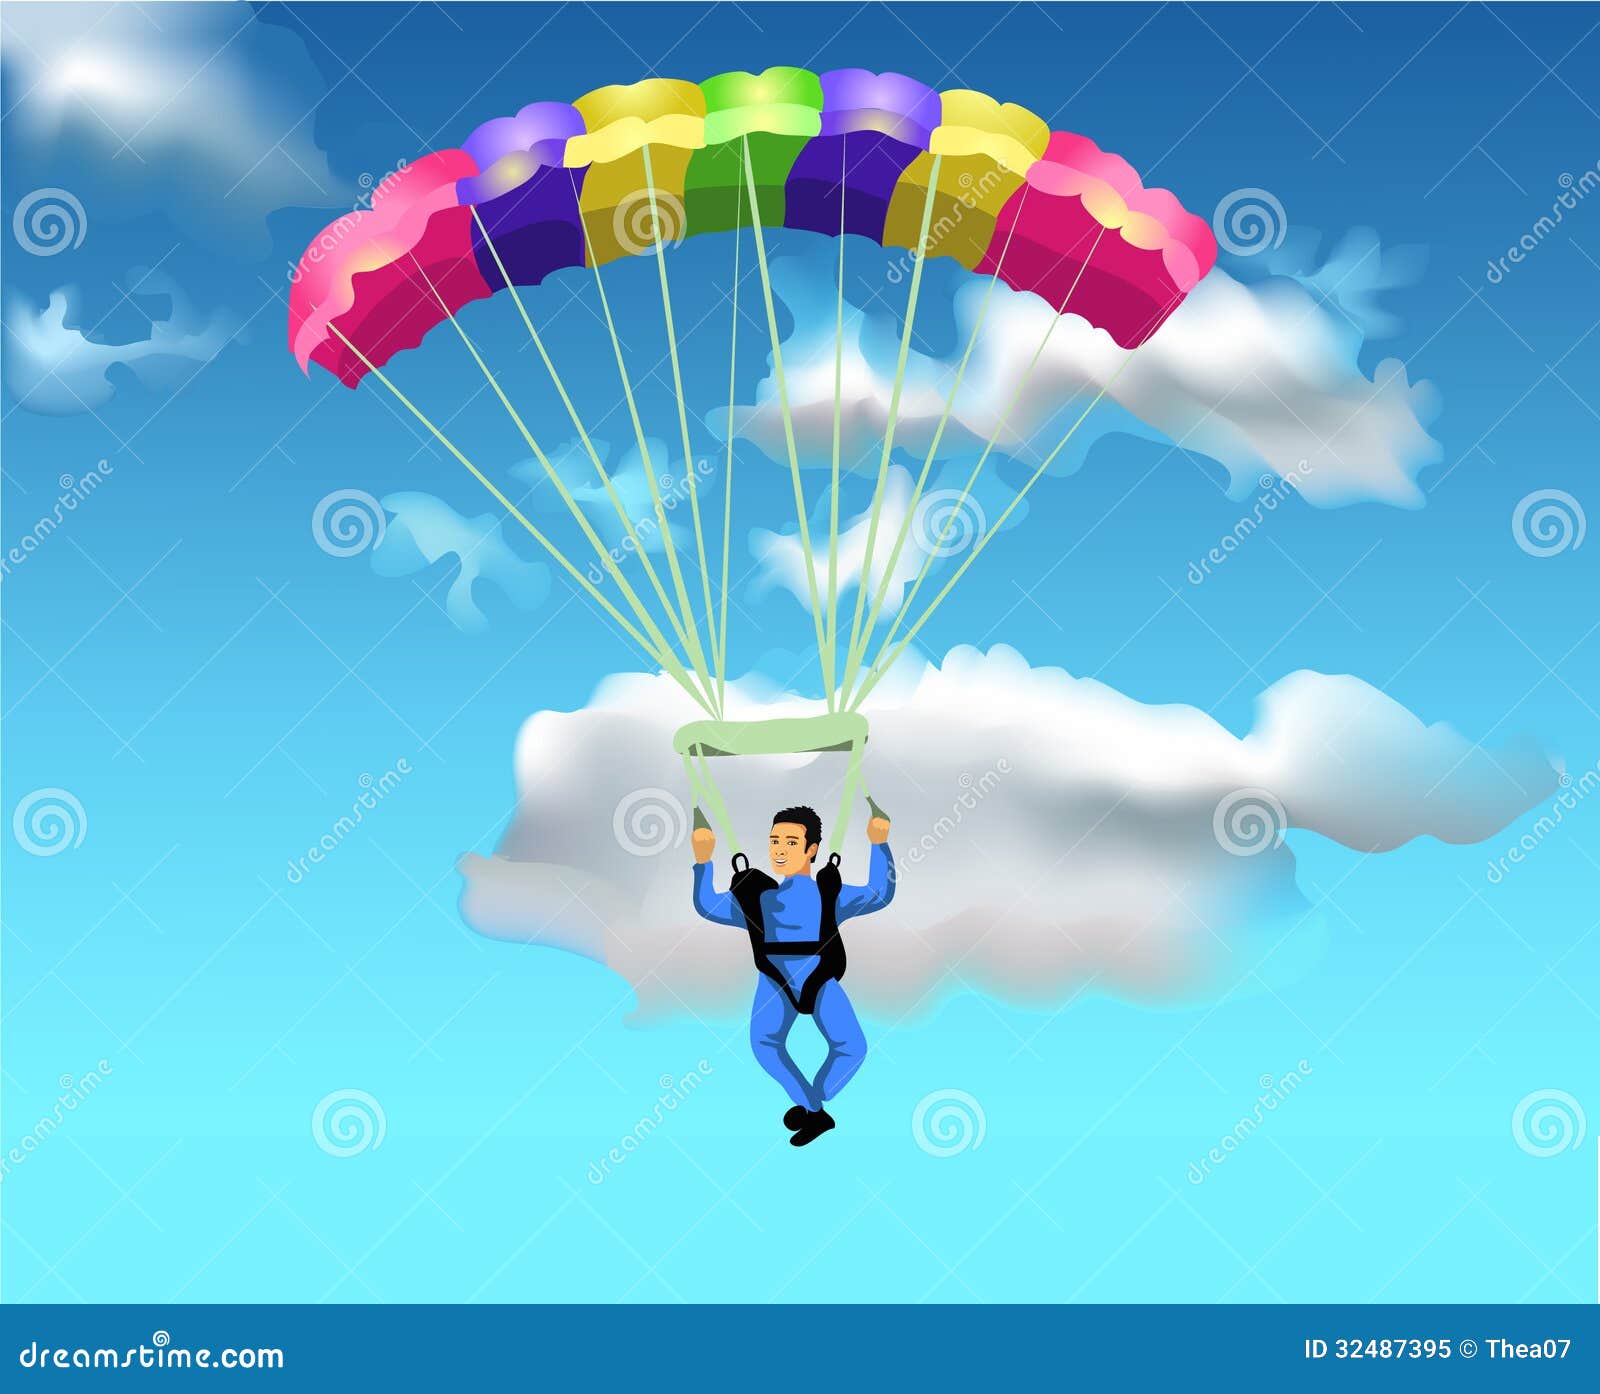 man flying with the parachute